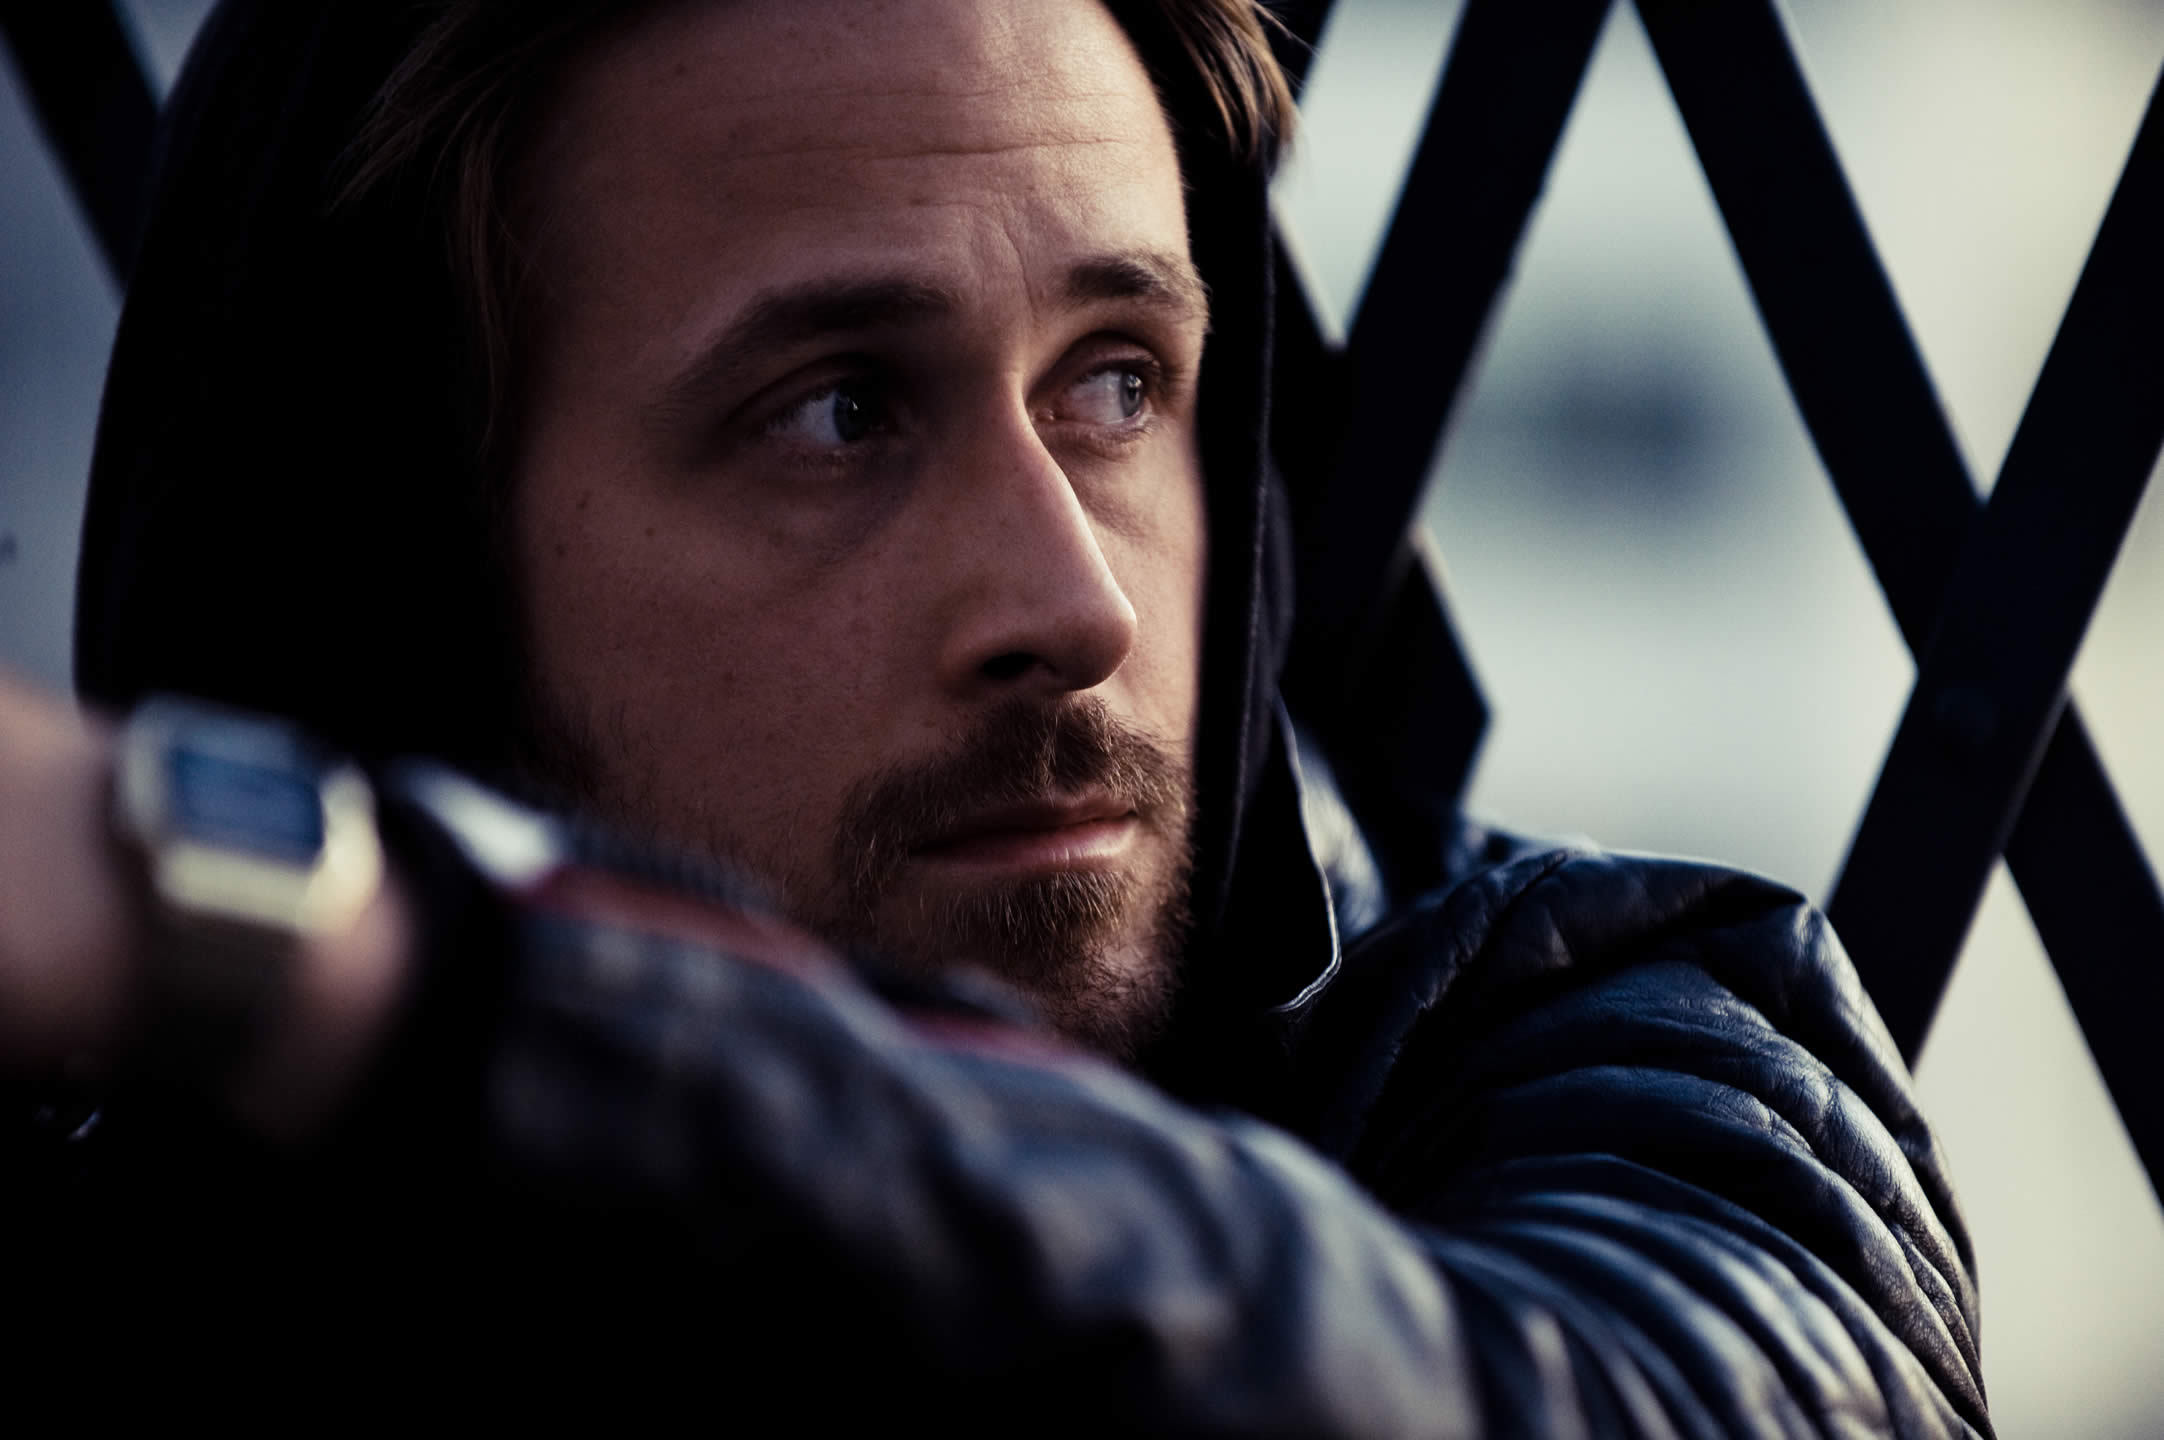 Mobile wallpaper: Ryan Gosling, People, Men, Actors, Cinema, 18680 download  the picture for free.